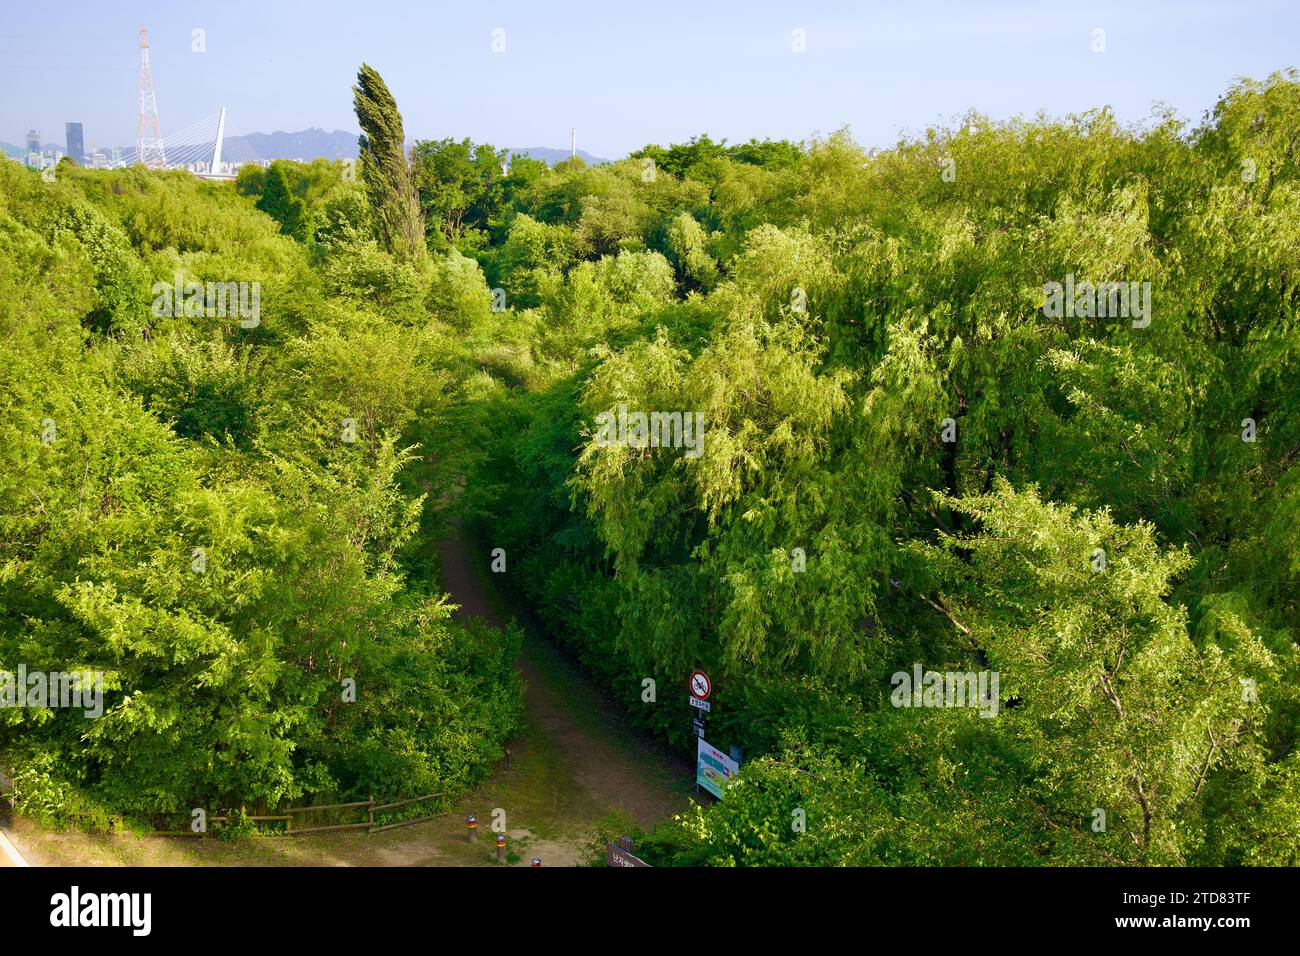 Seoul, South Korea - June 3, 2023: High-angle view of the lush Nanji Ecological Wetland Garden, with a network of dirt walking paths weaving through g Stock Photo